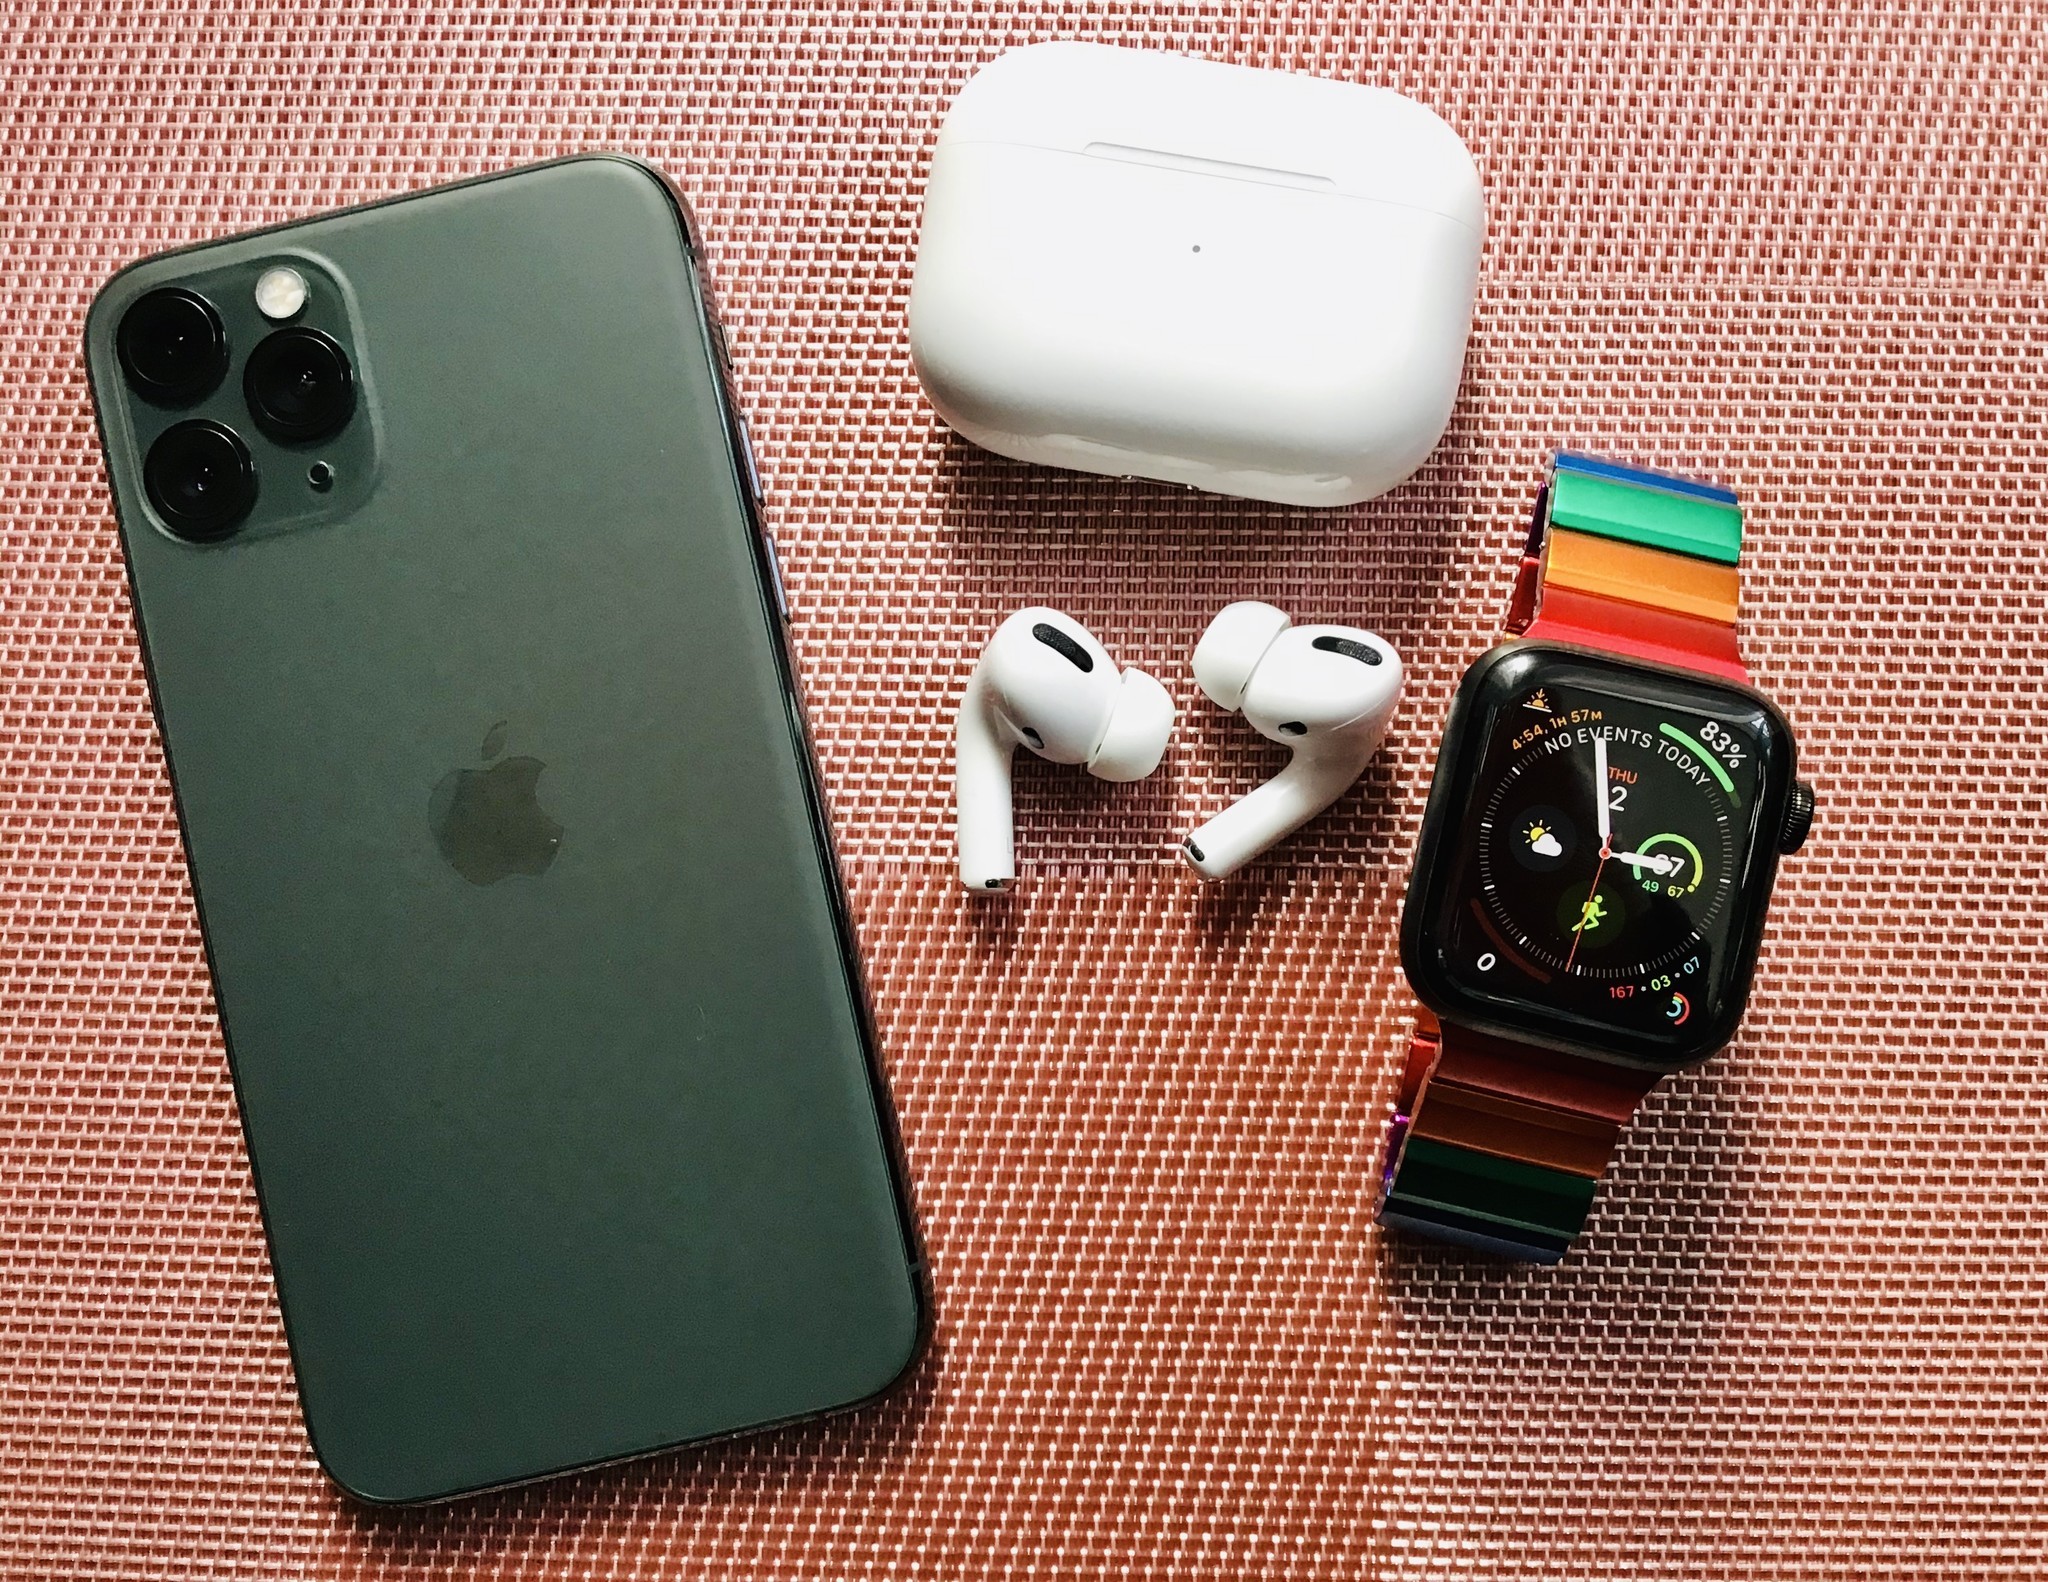 Midnight Green iPhone 11 Pro, AirPods Pro, and Apple Watch Series 5 Edition Space Black Titanium with JUKE Rainbow Ligero Band